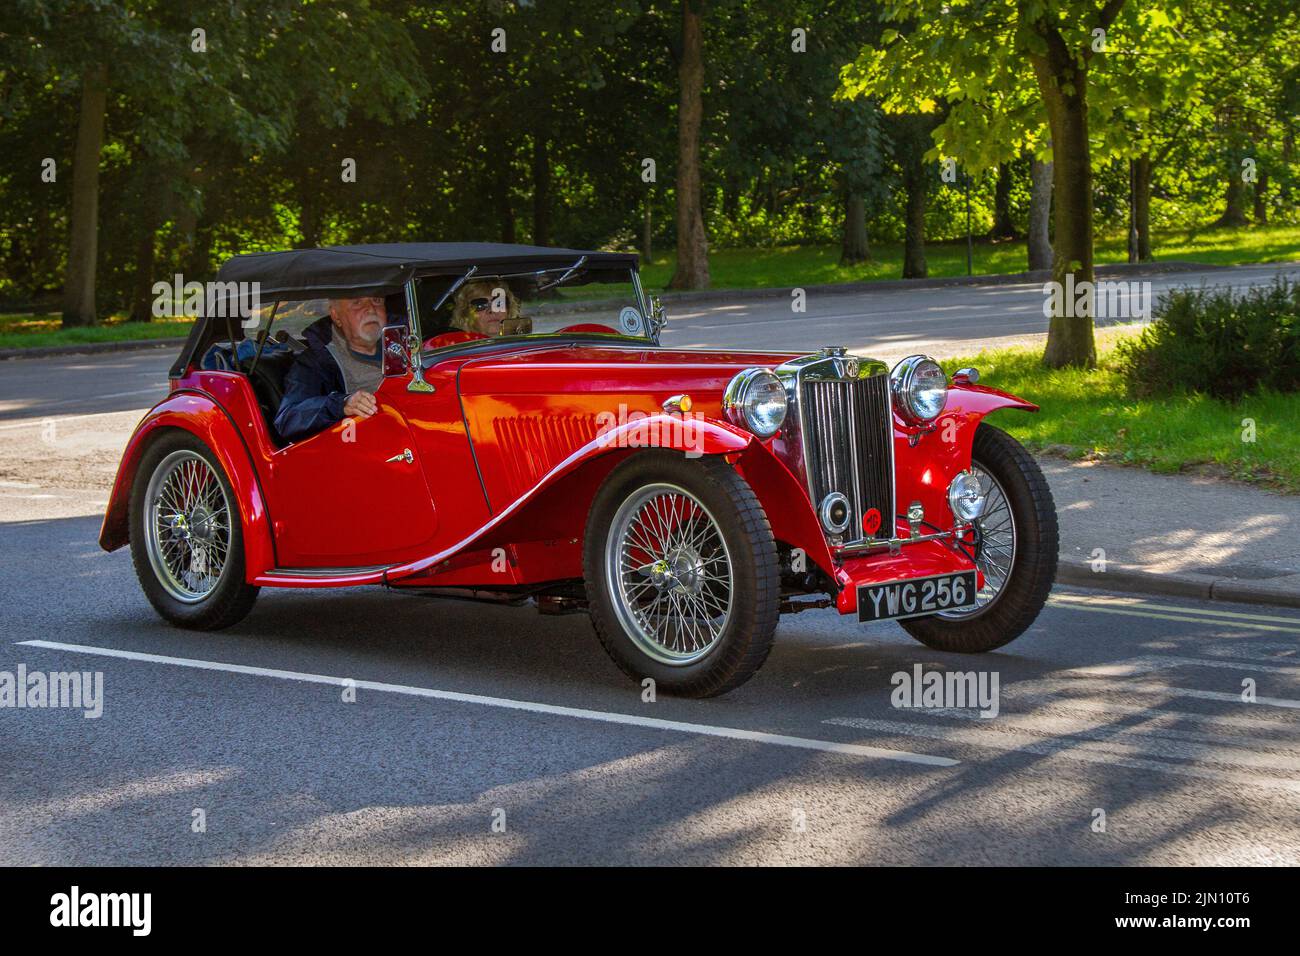 1949, 40s, forties red MG 1250cc petrol Cabrio, Collectable cars are travelling to display at the 13th Lytham Hall Summer Classic Car & Motorcycle Show, a Classic Vintage Collectible Transport Festival. Stock Photo